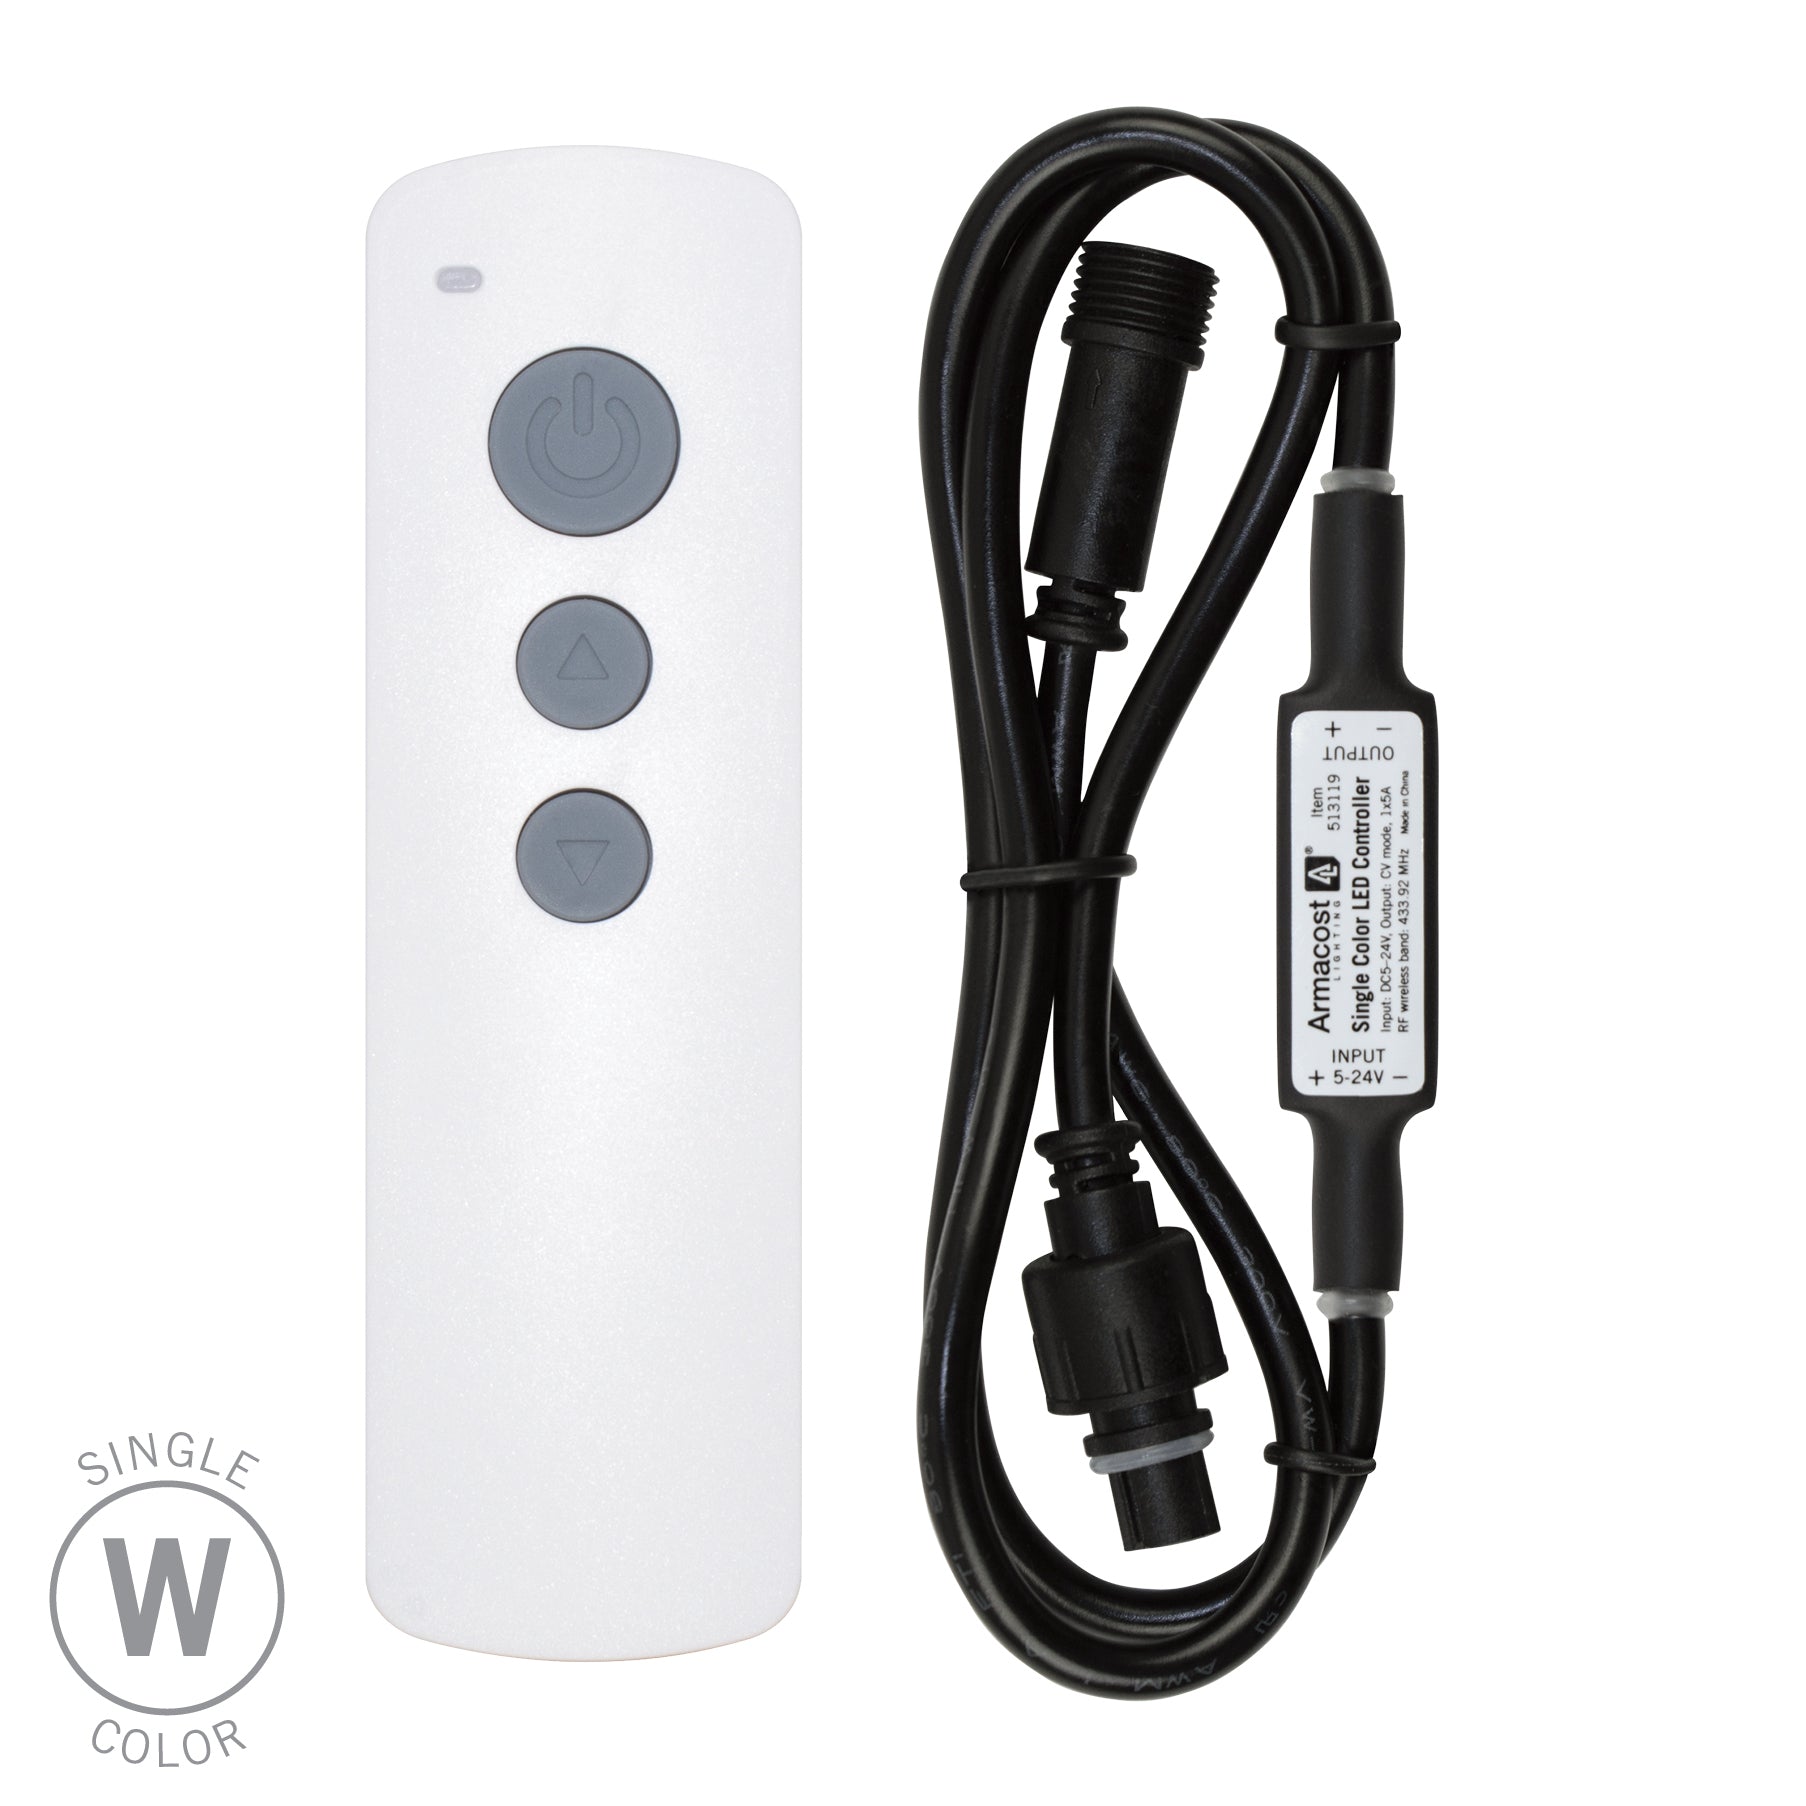 Waterproof Outdoor LED Light Wireless Remote Control Outlet Power Switch  Plug In